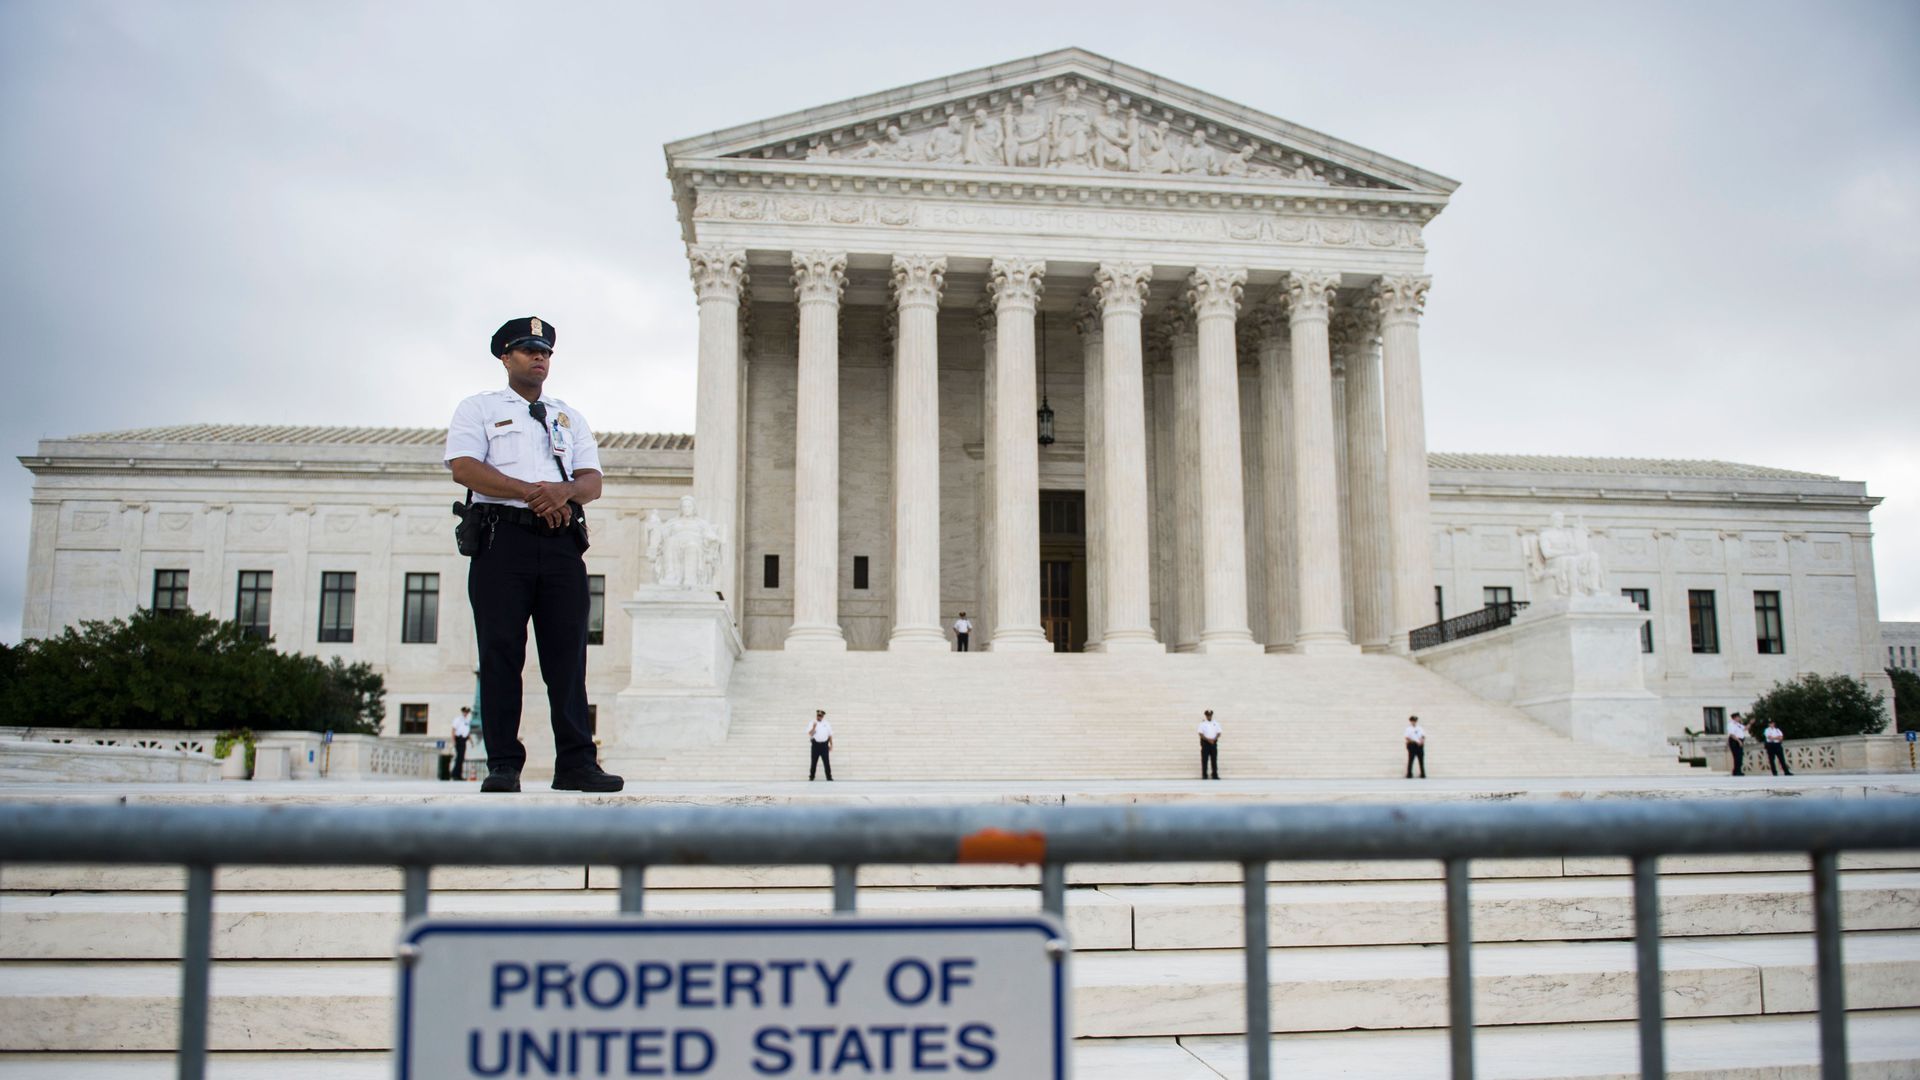 A security officer stands guard on the steps of the Supreme Court